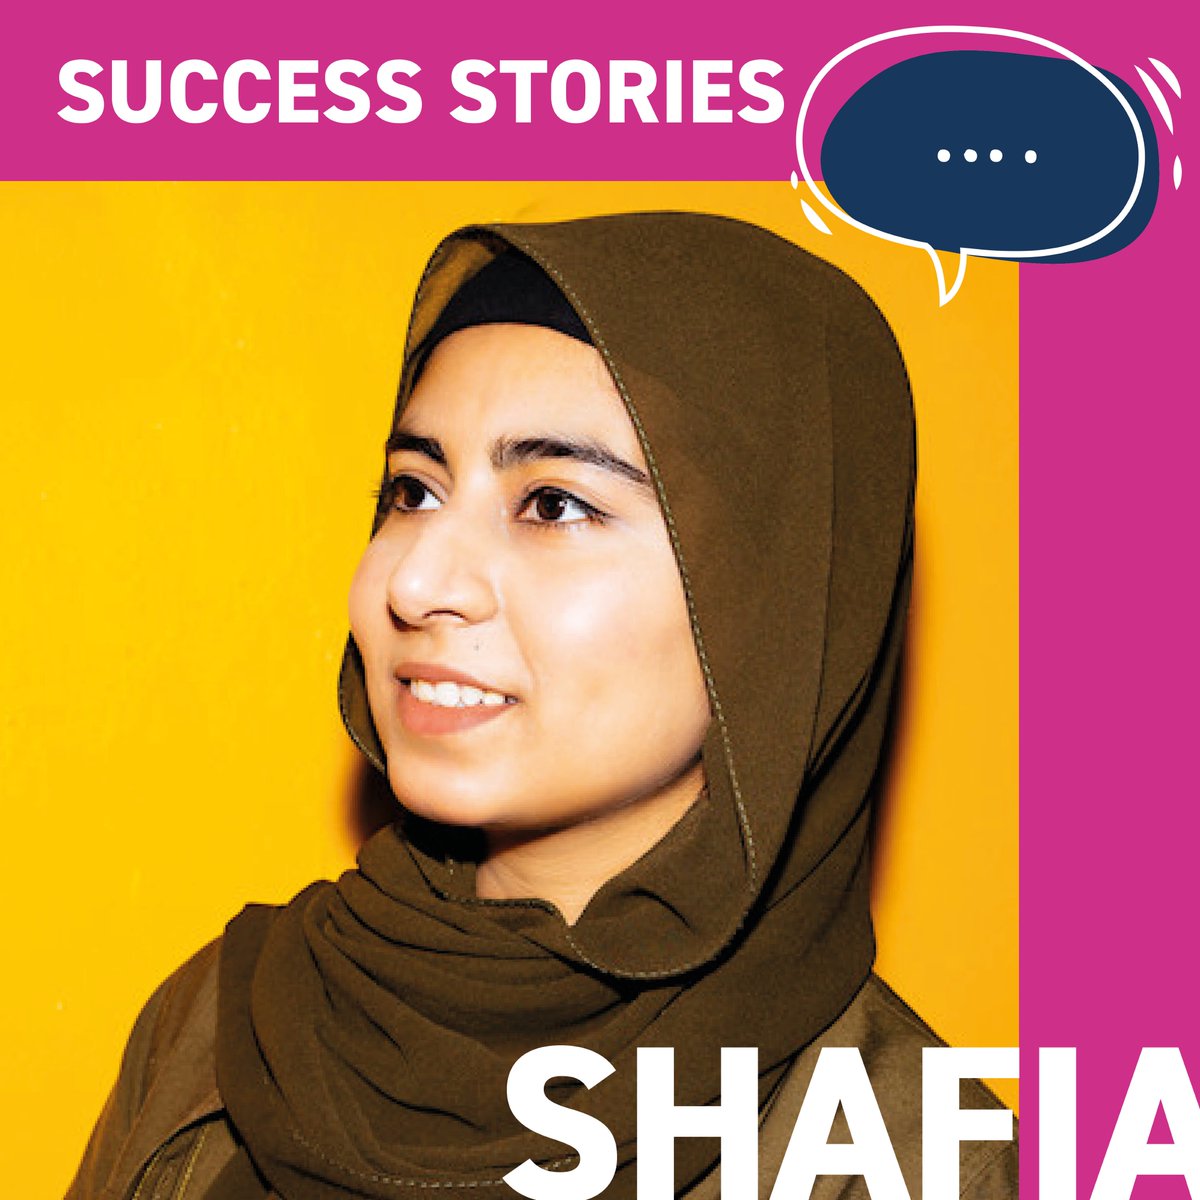 Shafia has gone from Creative Media Camp @TheMcrCollege to Professional Illustrator.

She became the first diverse role model for the @MPAweareyou 's ‘A Place for You’ campaign celebrating diverse role models.

Shafia is a Digital Producer who has worked for some incredible…